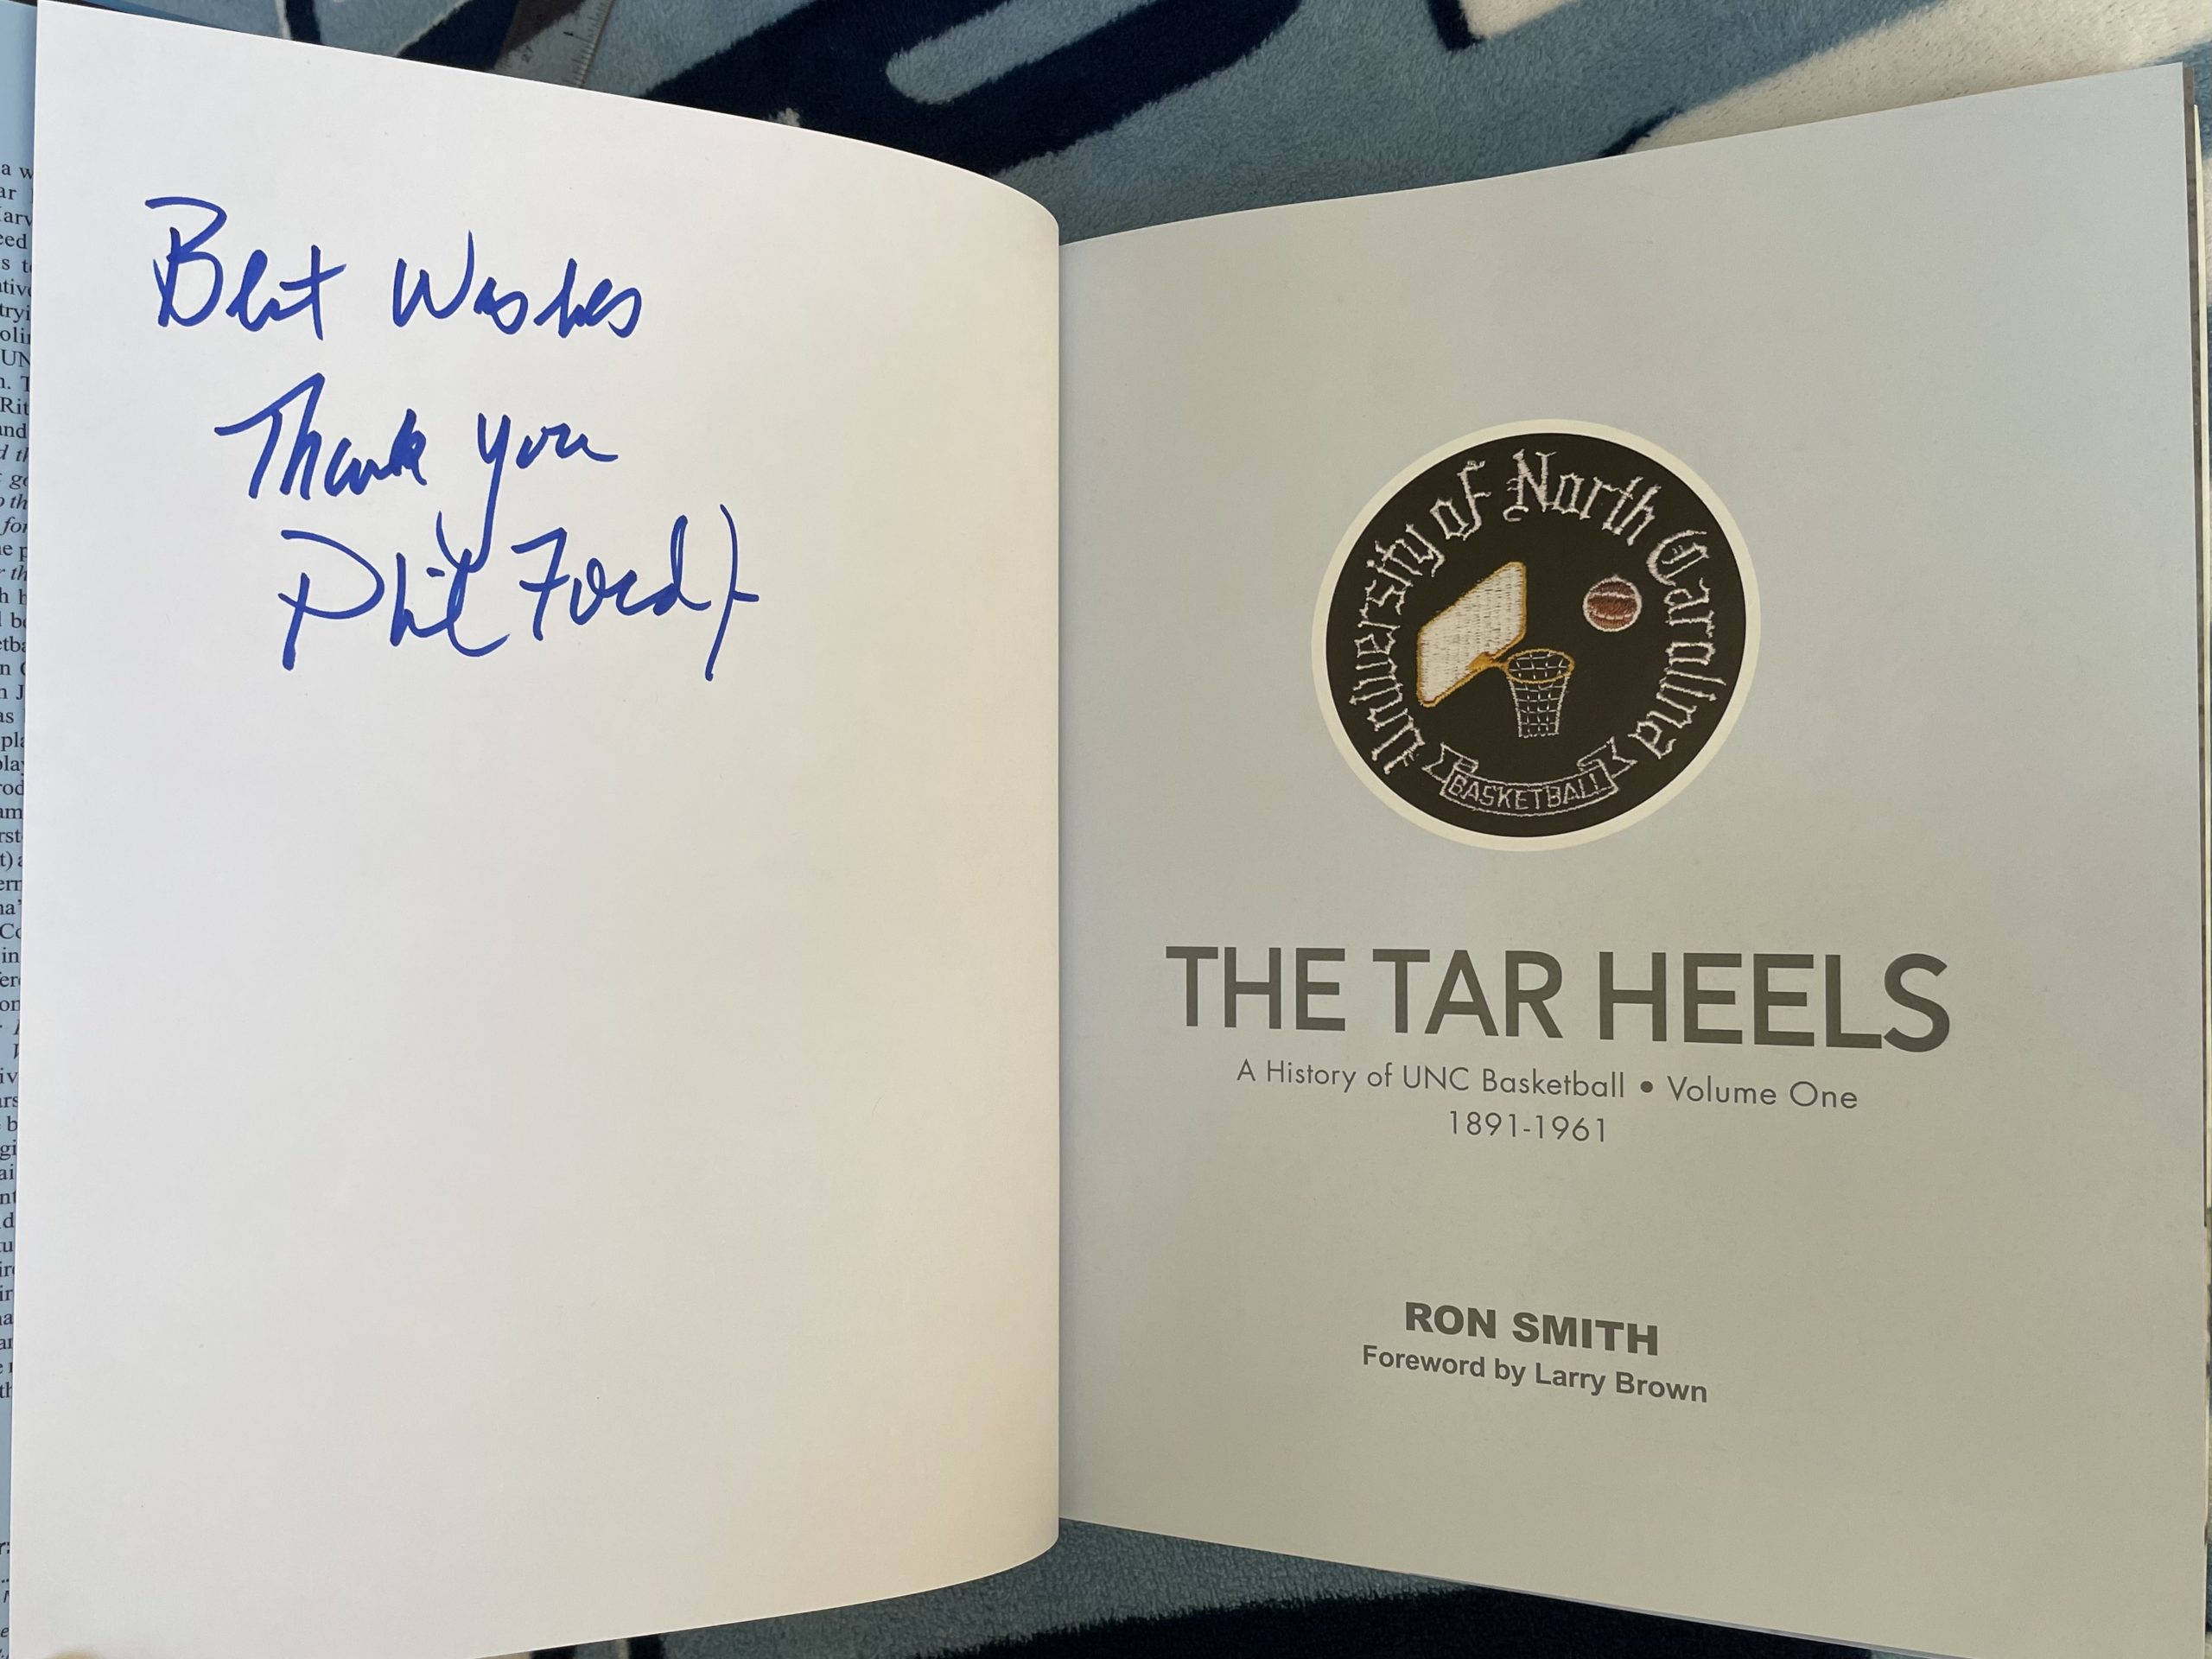 3/29/22 GiveUNC Raffle for The Tar Heels, Vol 1 signed by Phil Ford